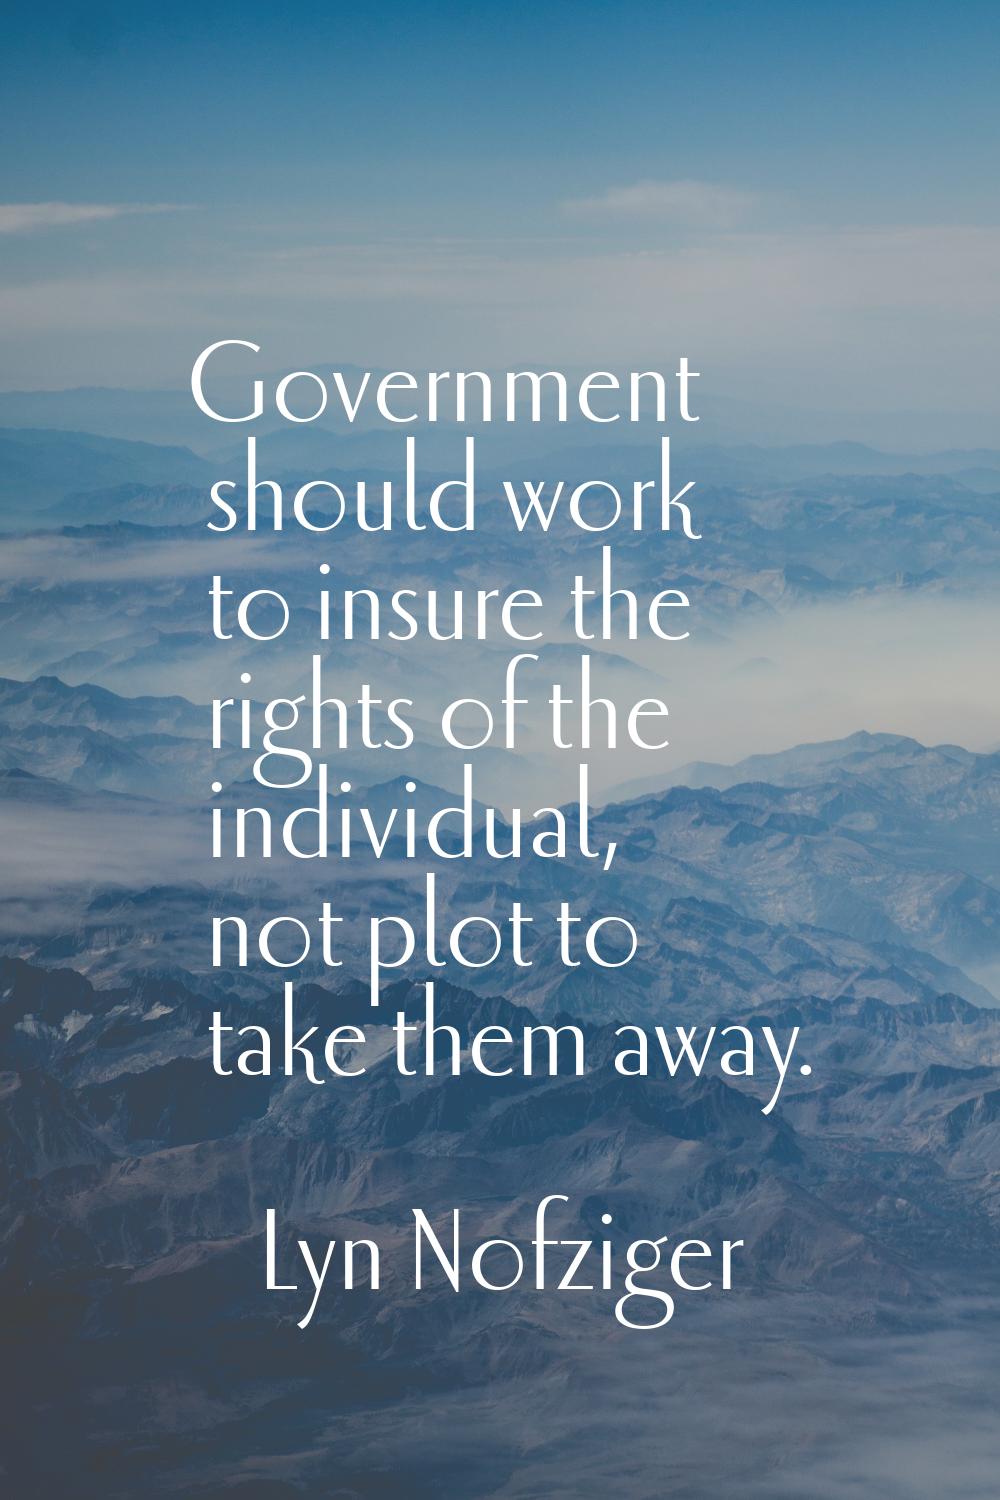 Government should work to insure the rights of the individual, not plot to take them away.